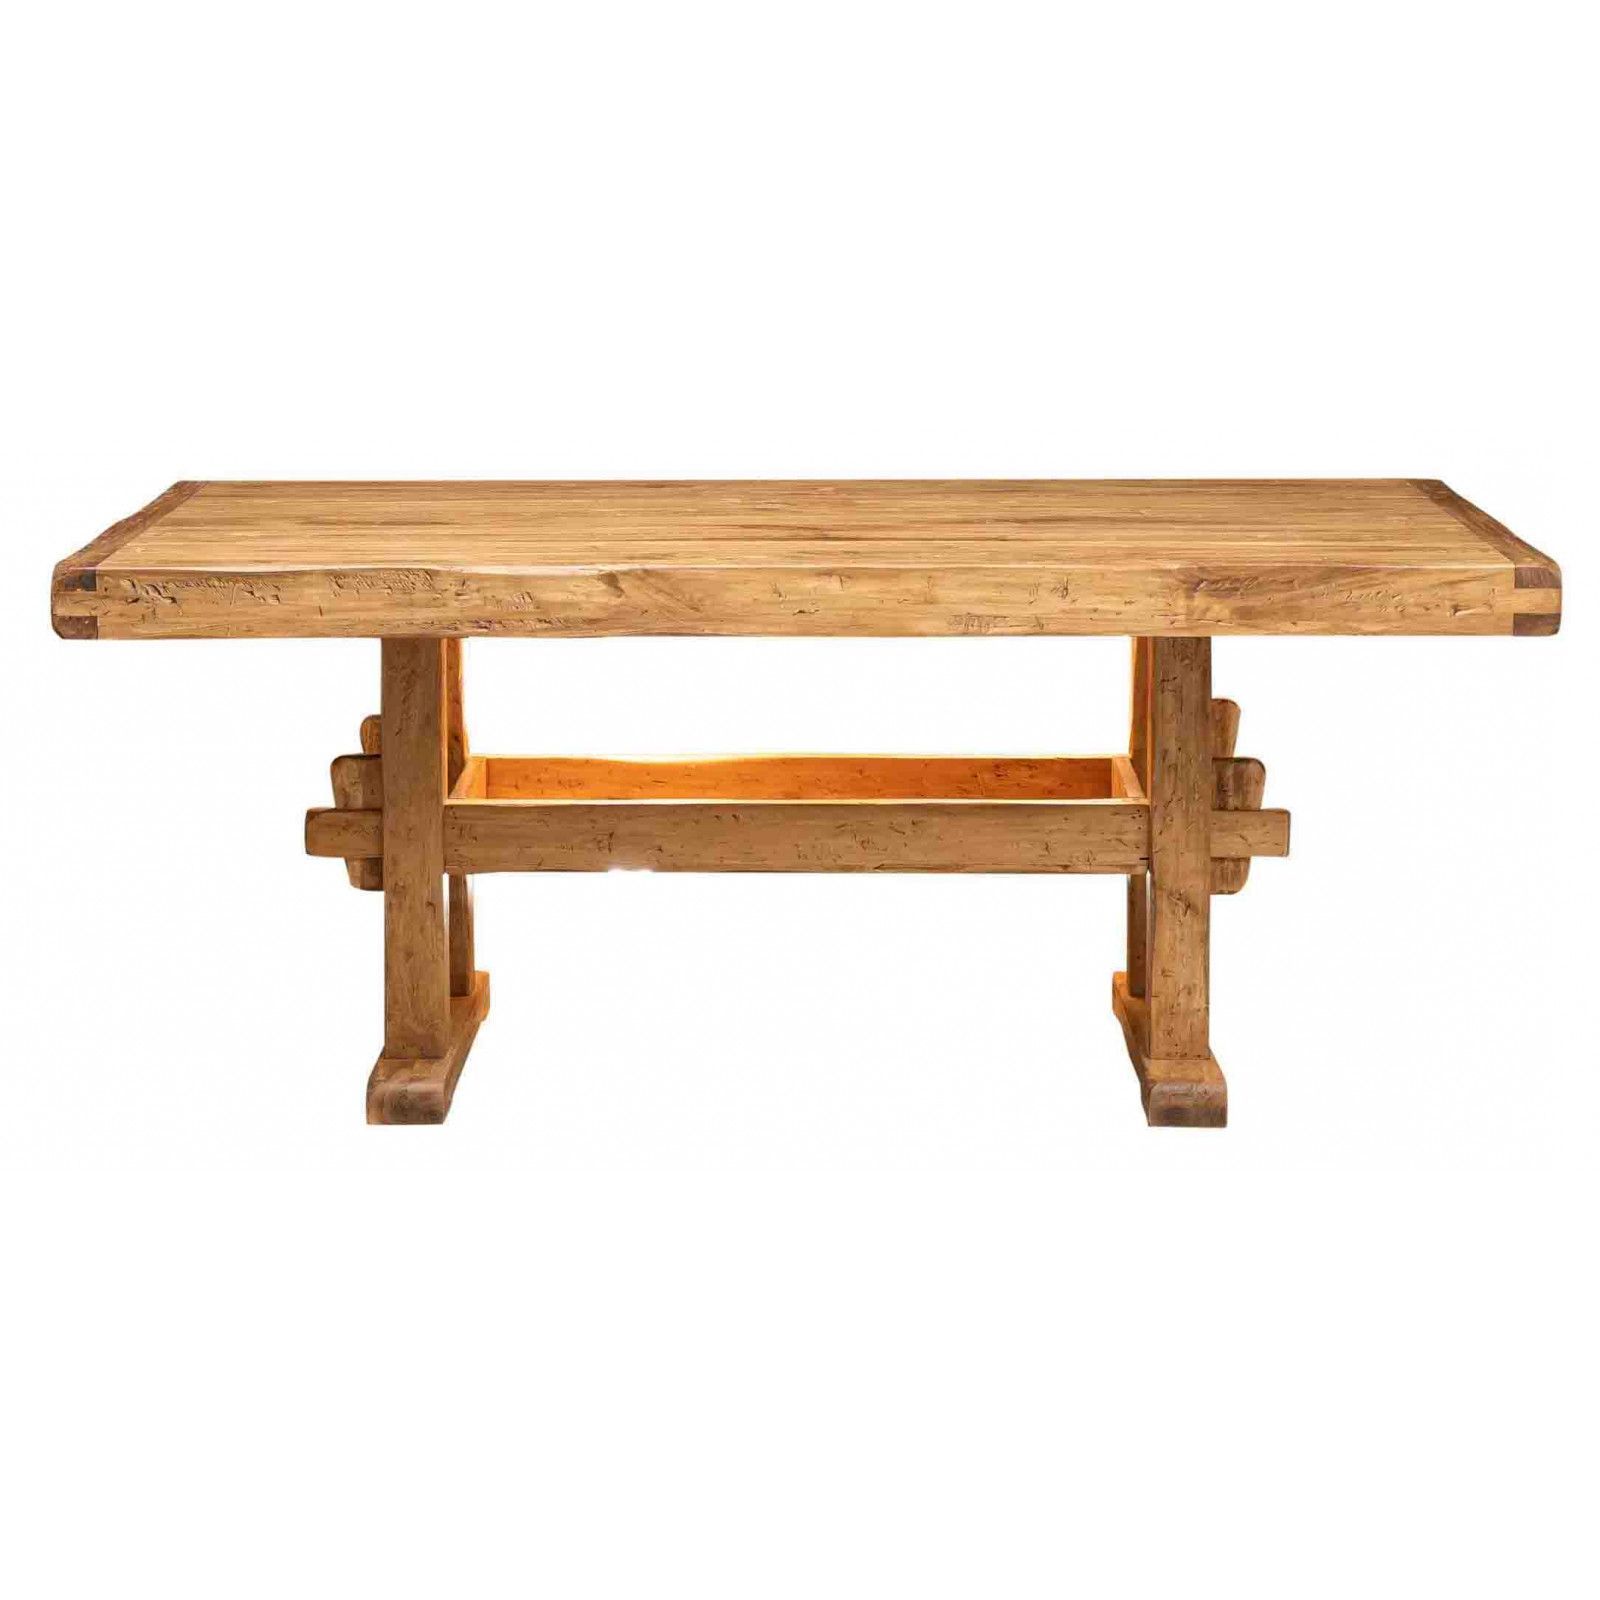 Rustic Country Table In Solid Lime Wood Natural Finish Pertaining To Well Known Rustic Natural Outdoor Tables (View 2 of 15)